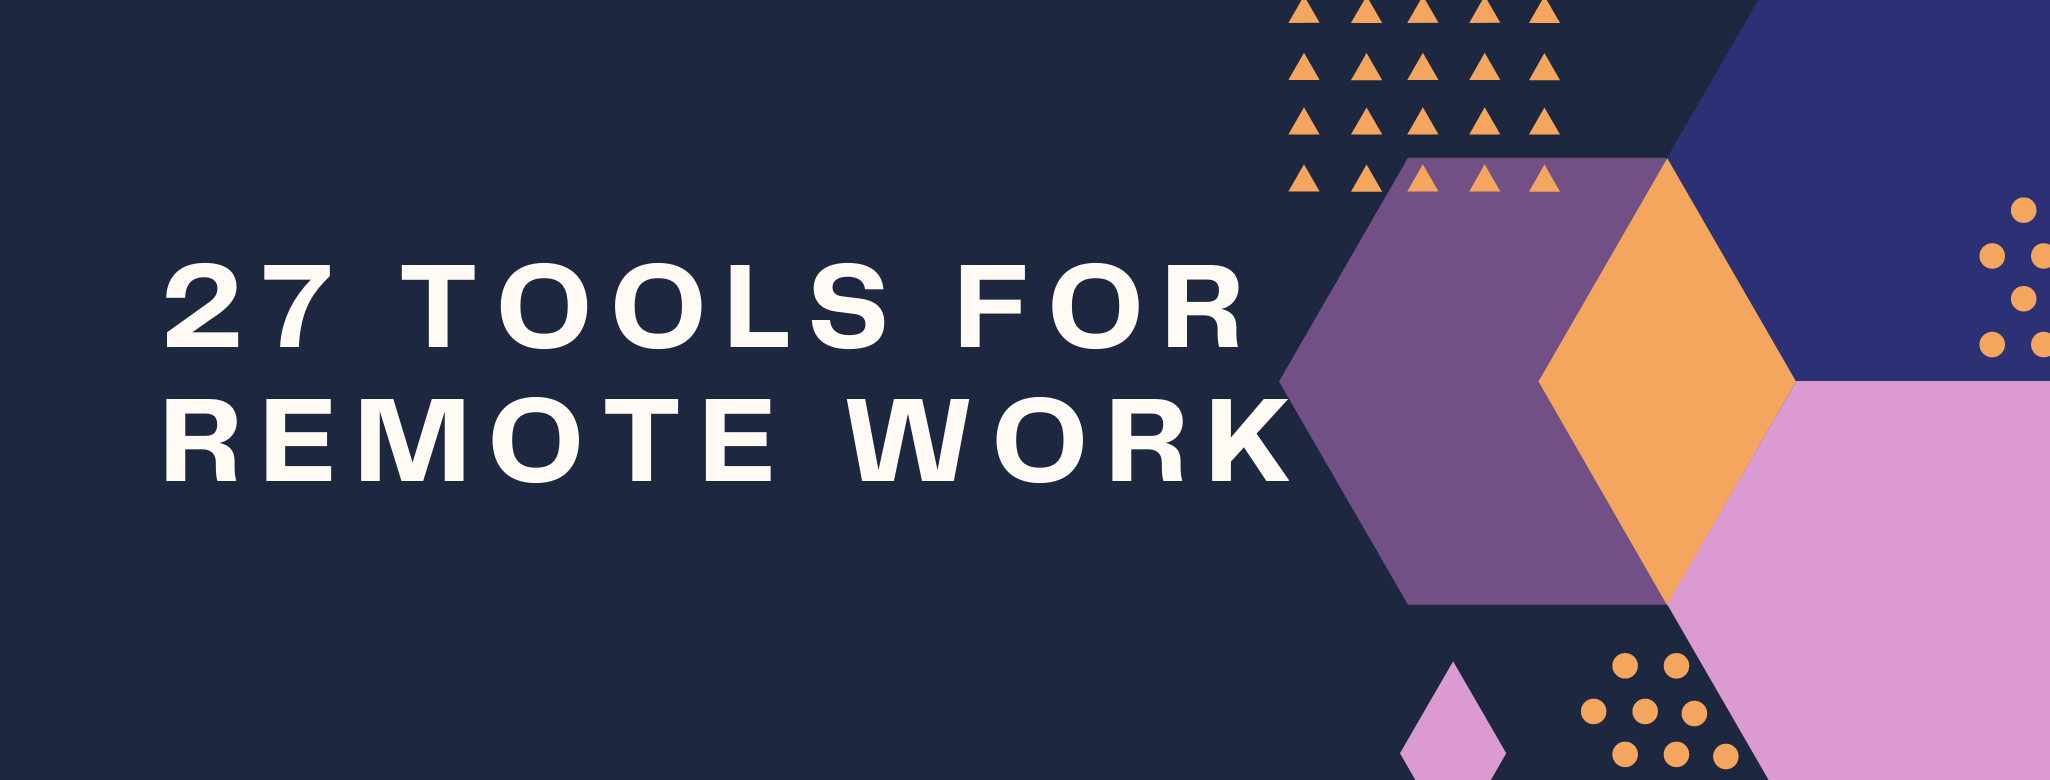 27 TOOLS FOR REMOTE WORK